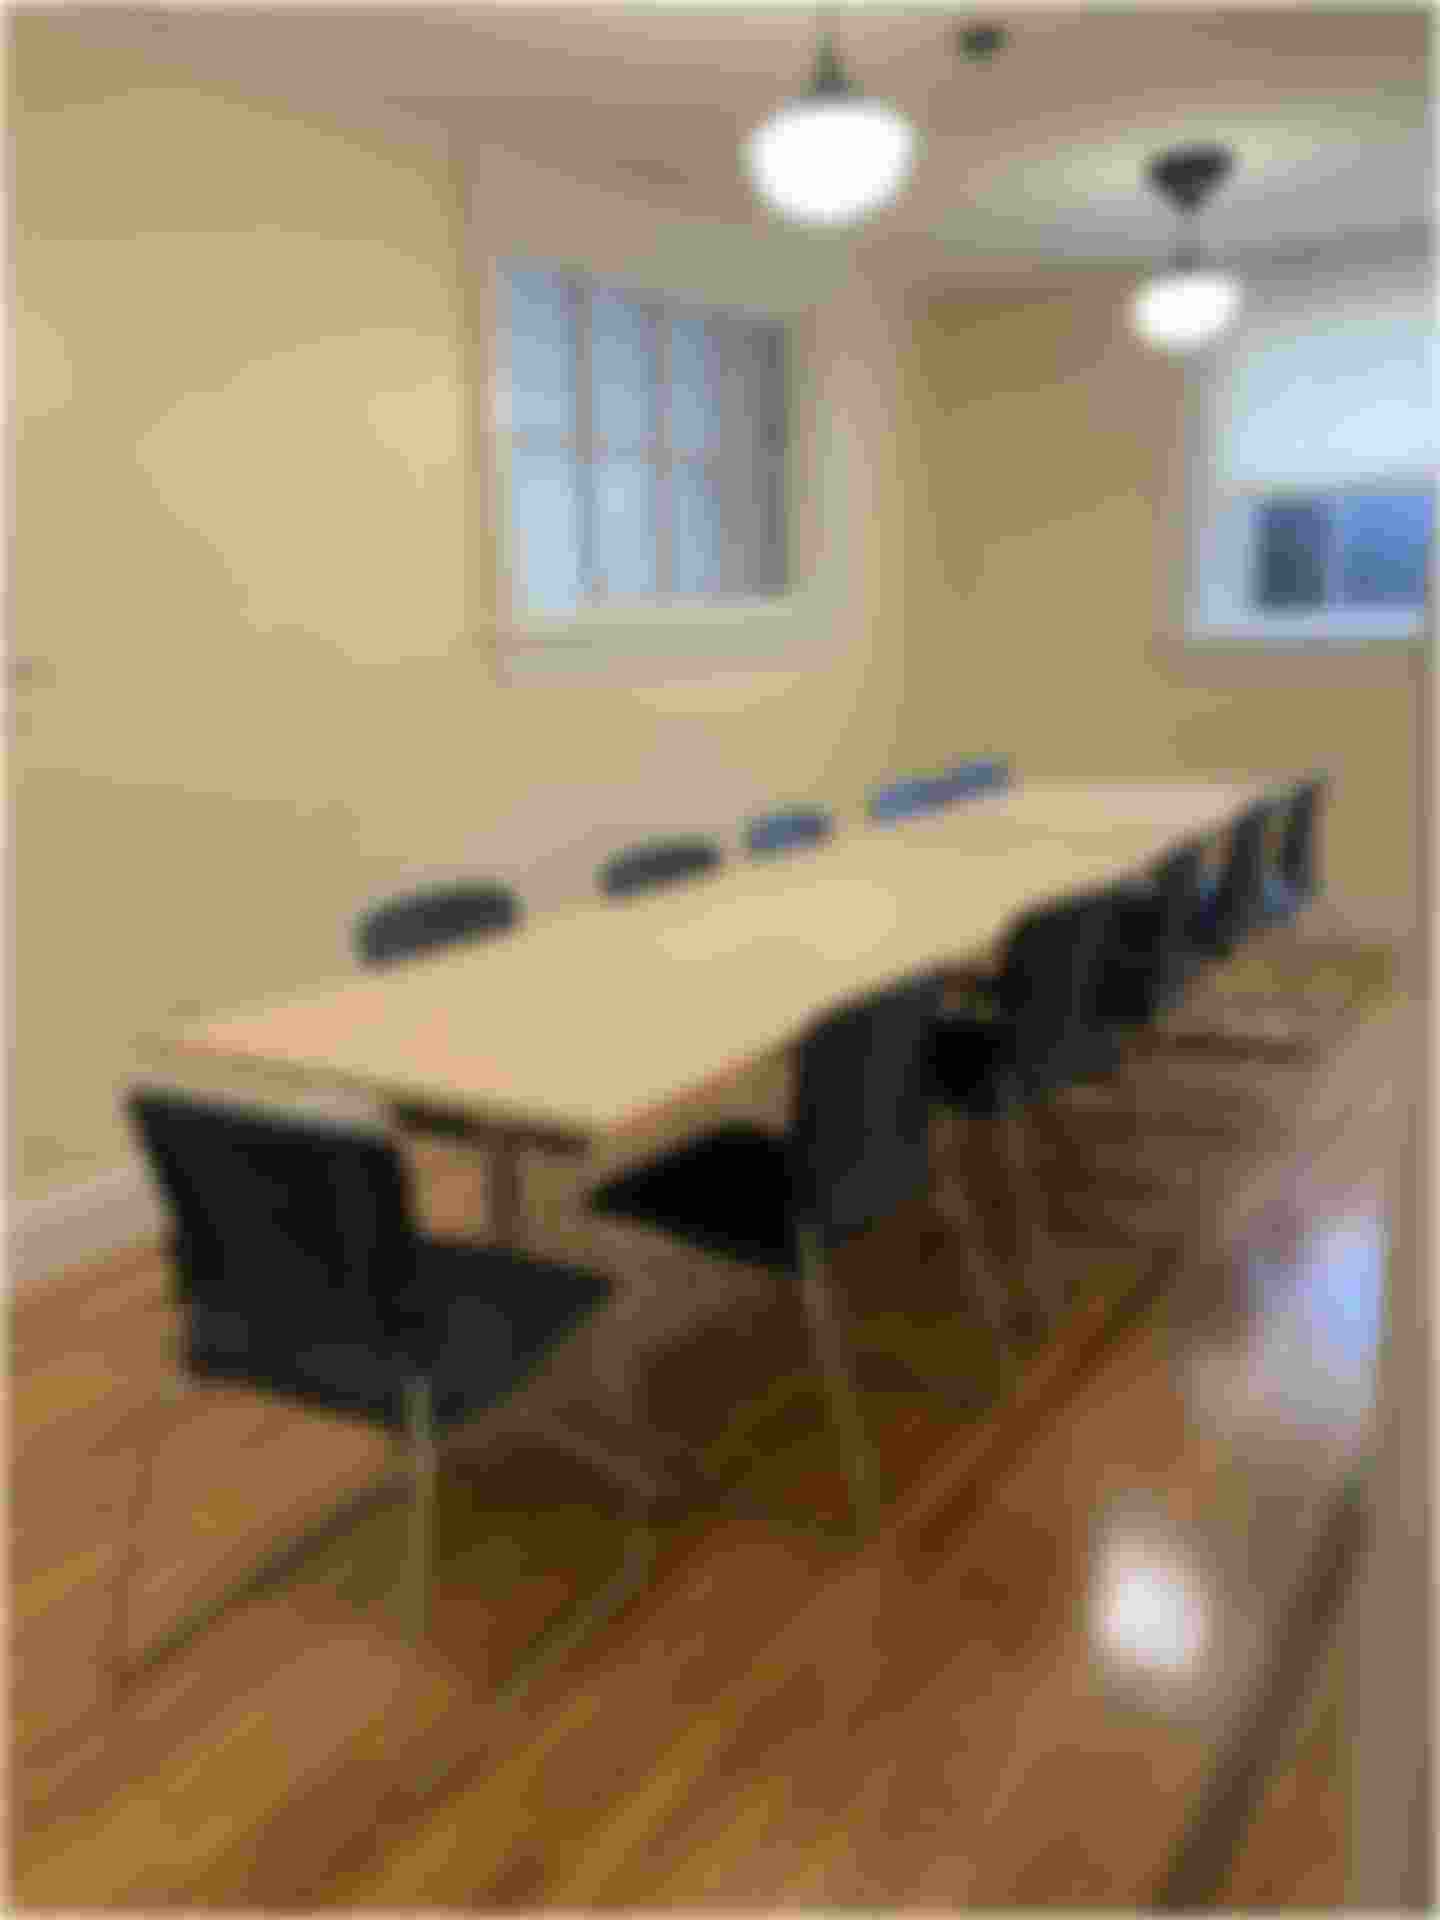 Image of the William Hall Library Small Meeting Room with tables and chairs set up